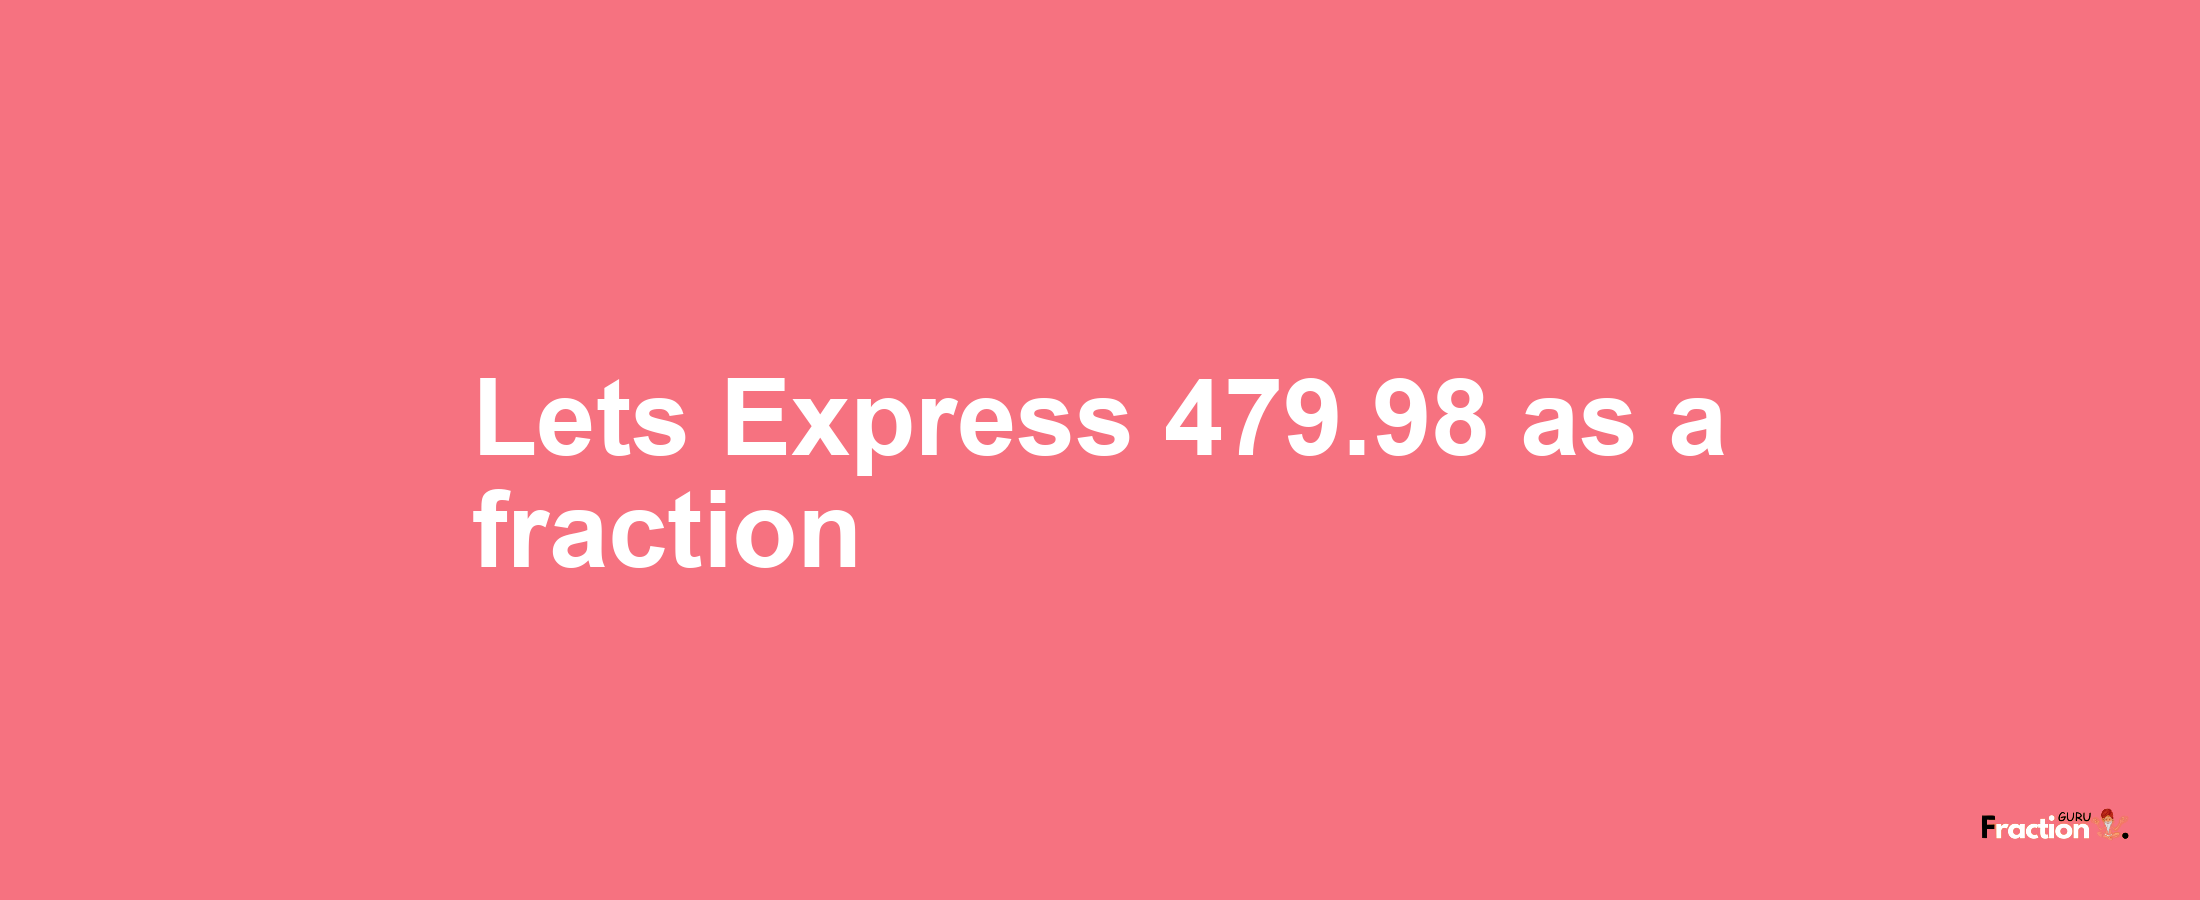 Lets Express 479.98 as afraction